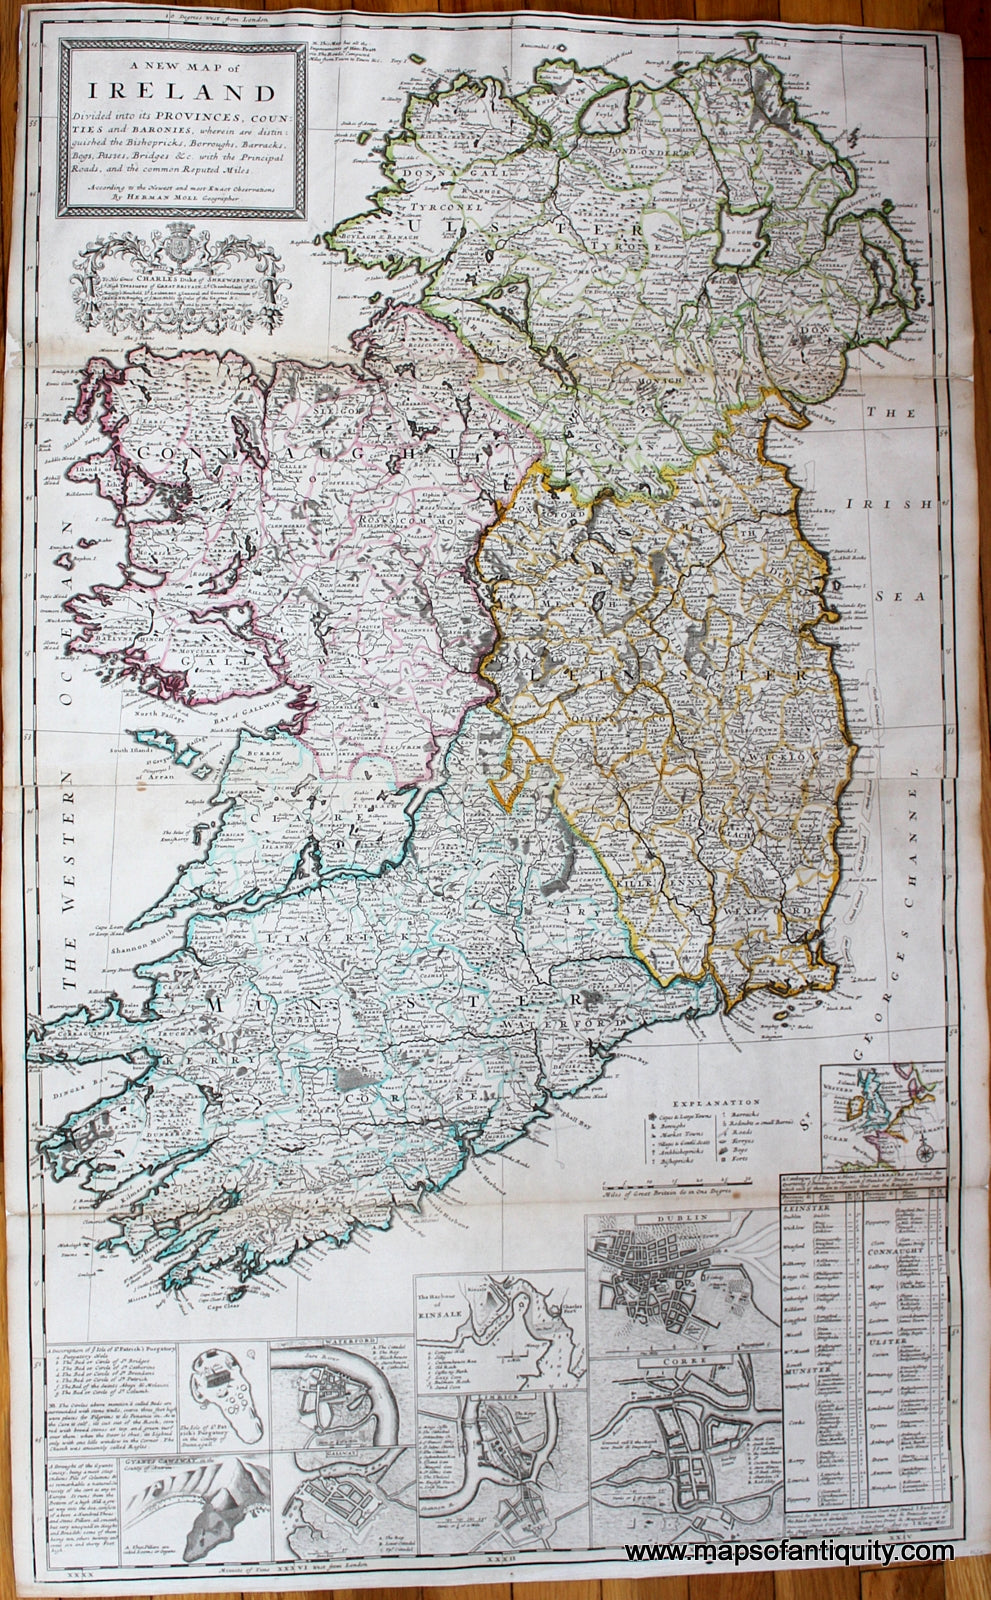 Antique-Hand-Colored-Map-A-New-Map-of-Ireland**********-Ireland--1714-Hermann-Moll-Maps-Of-Antiquity